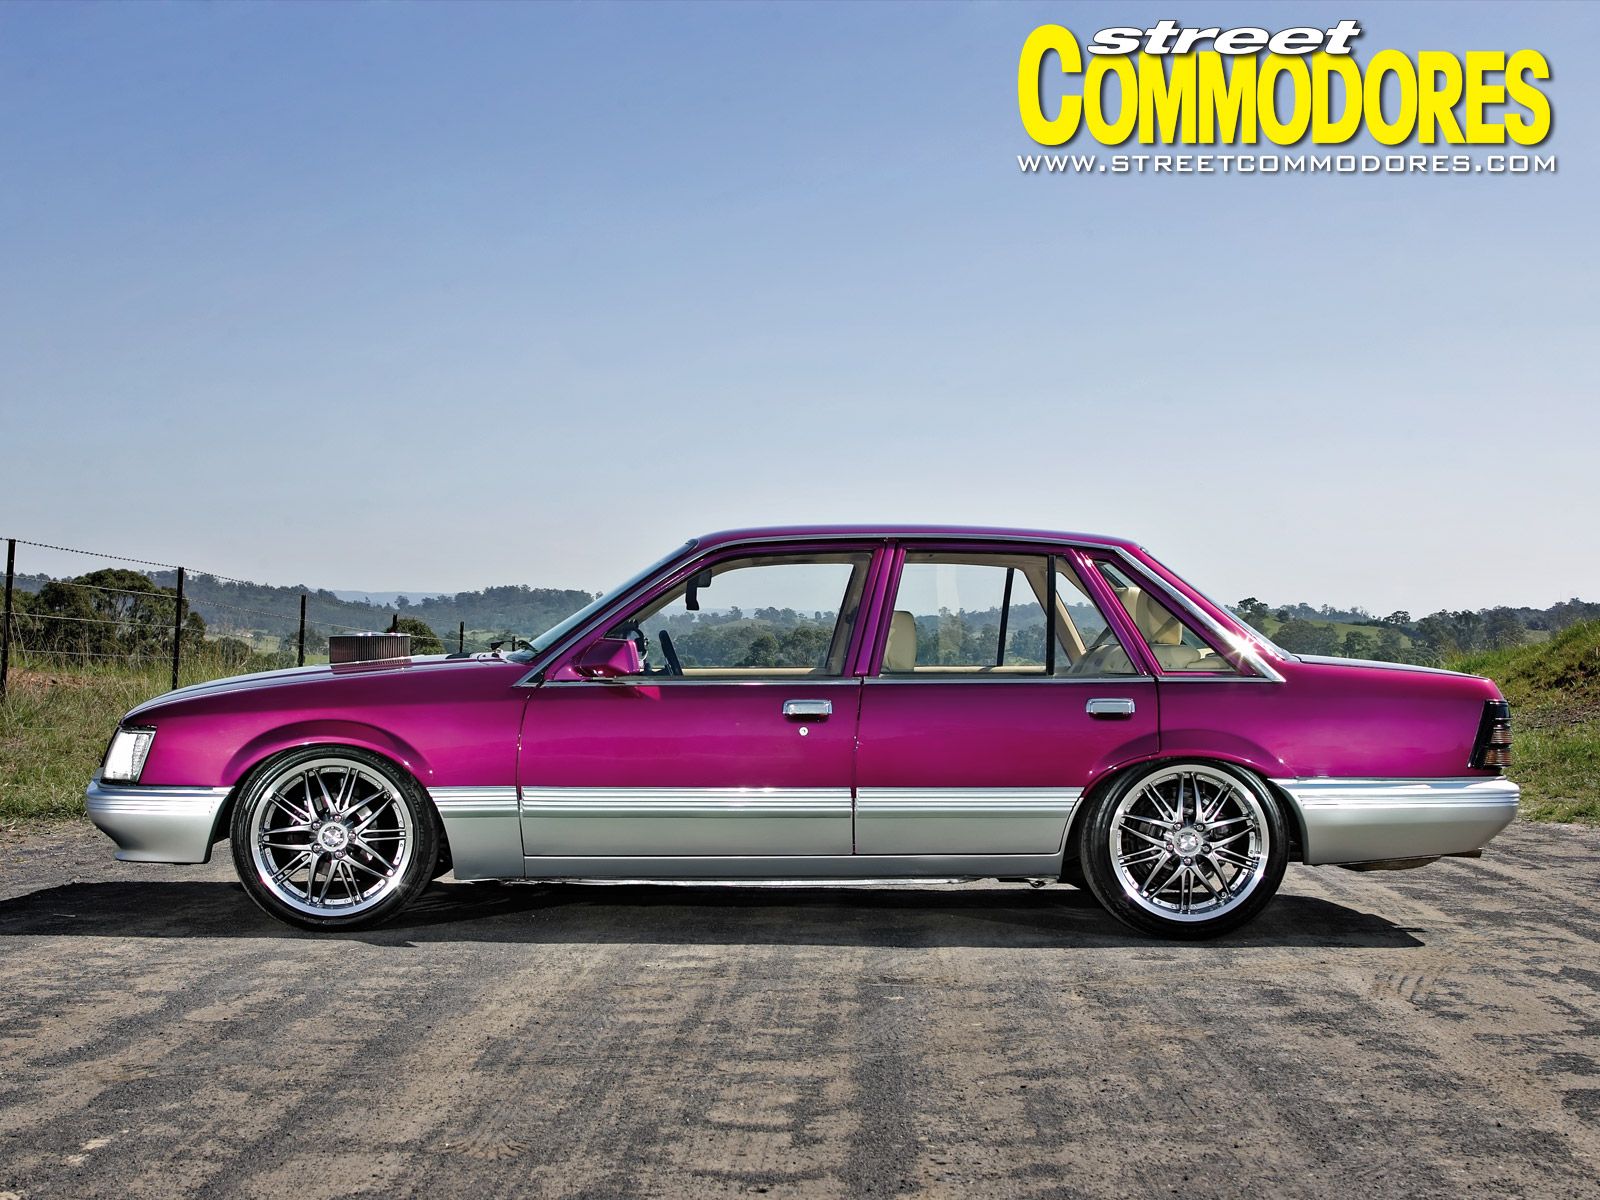 Holden Commodore Royale VK, photo, videos and more on TopWorldAuto